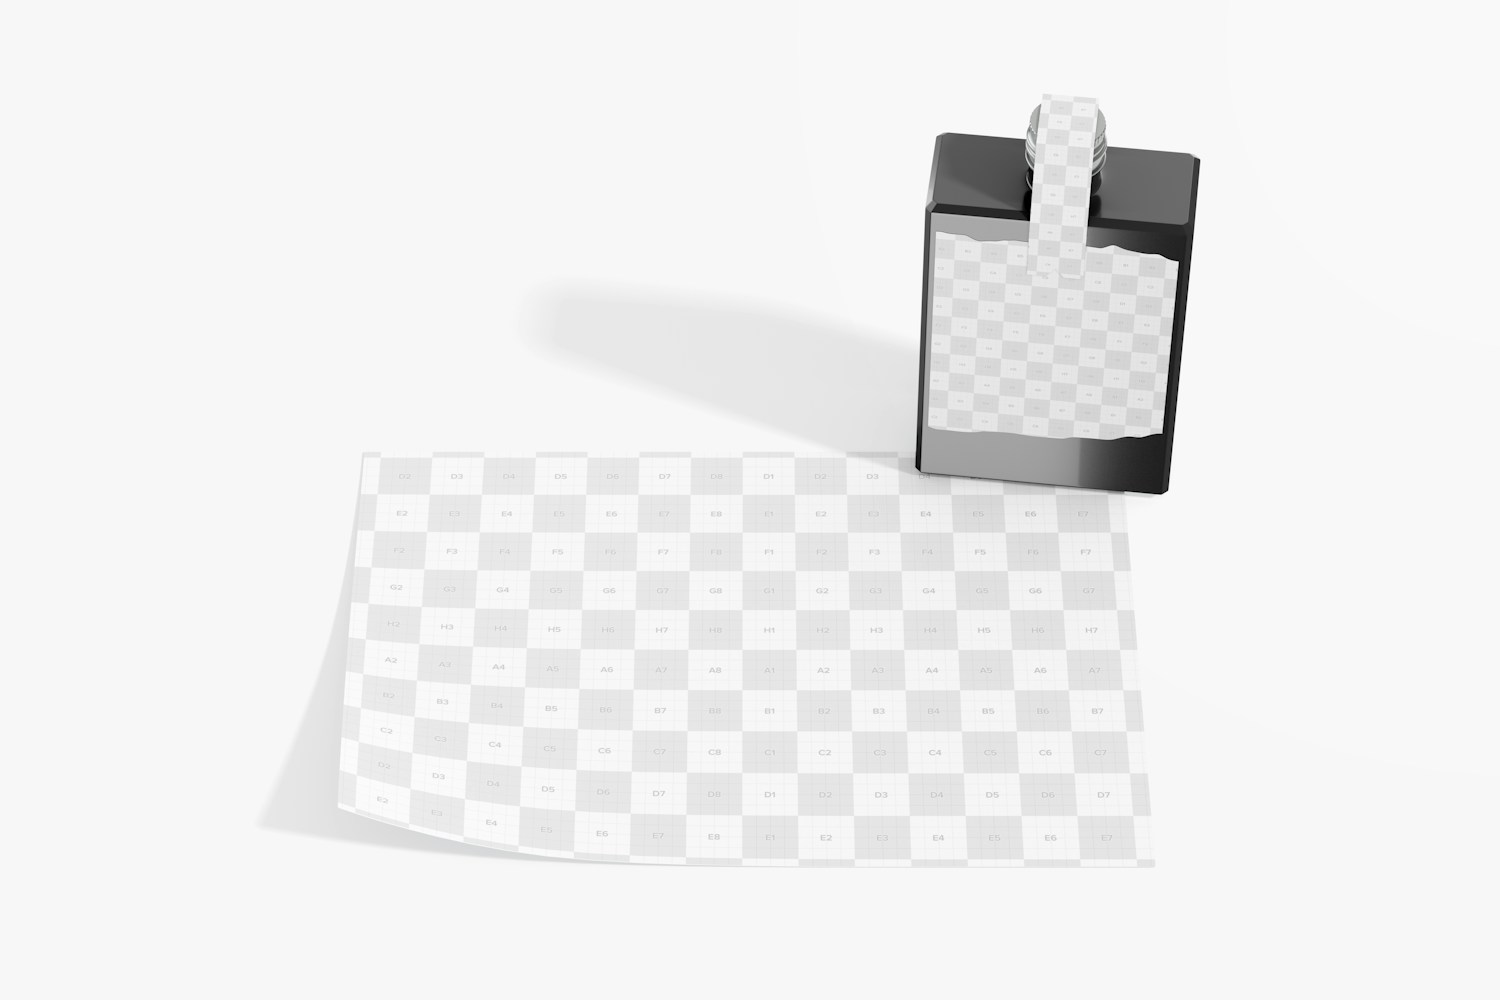 Small Tequila Bottle with Stationery Mockup, High Angle View